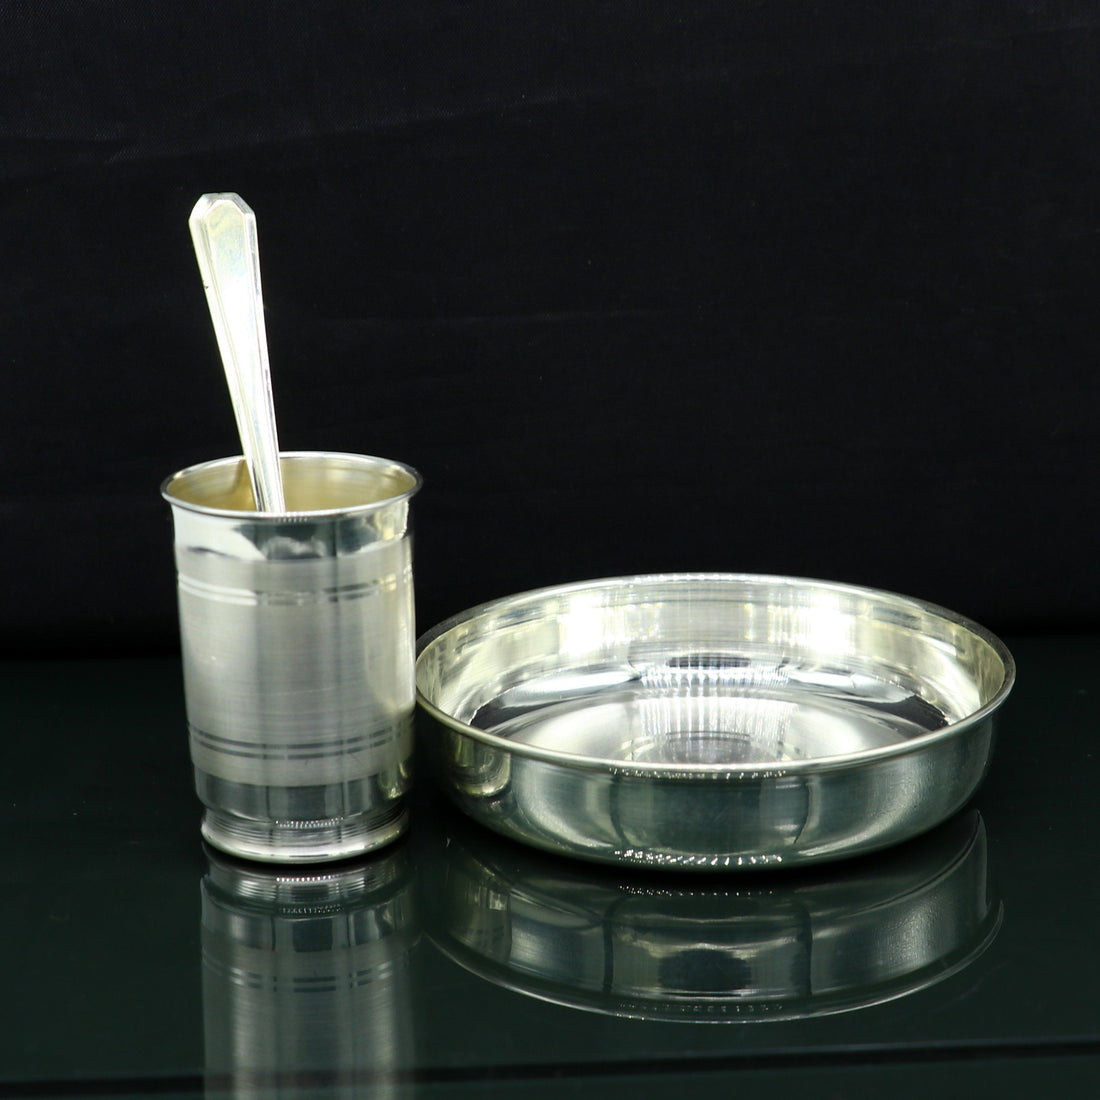 999 fine silver handmade small water/milk Glass tumbler, tray /plate baby kids silver cup & spoon utensils, stay healthy from bacteria sv156 - TRIBAL ORNAMENTS